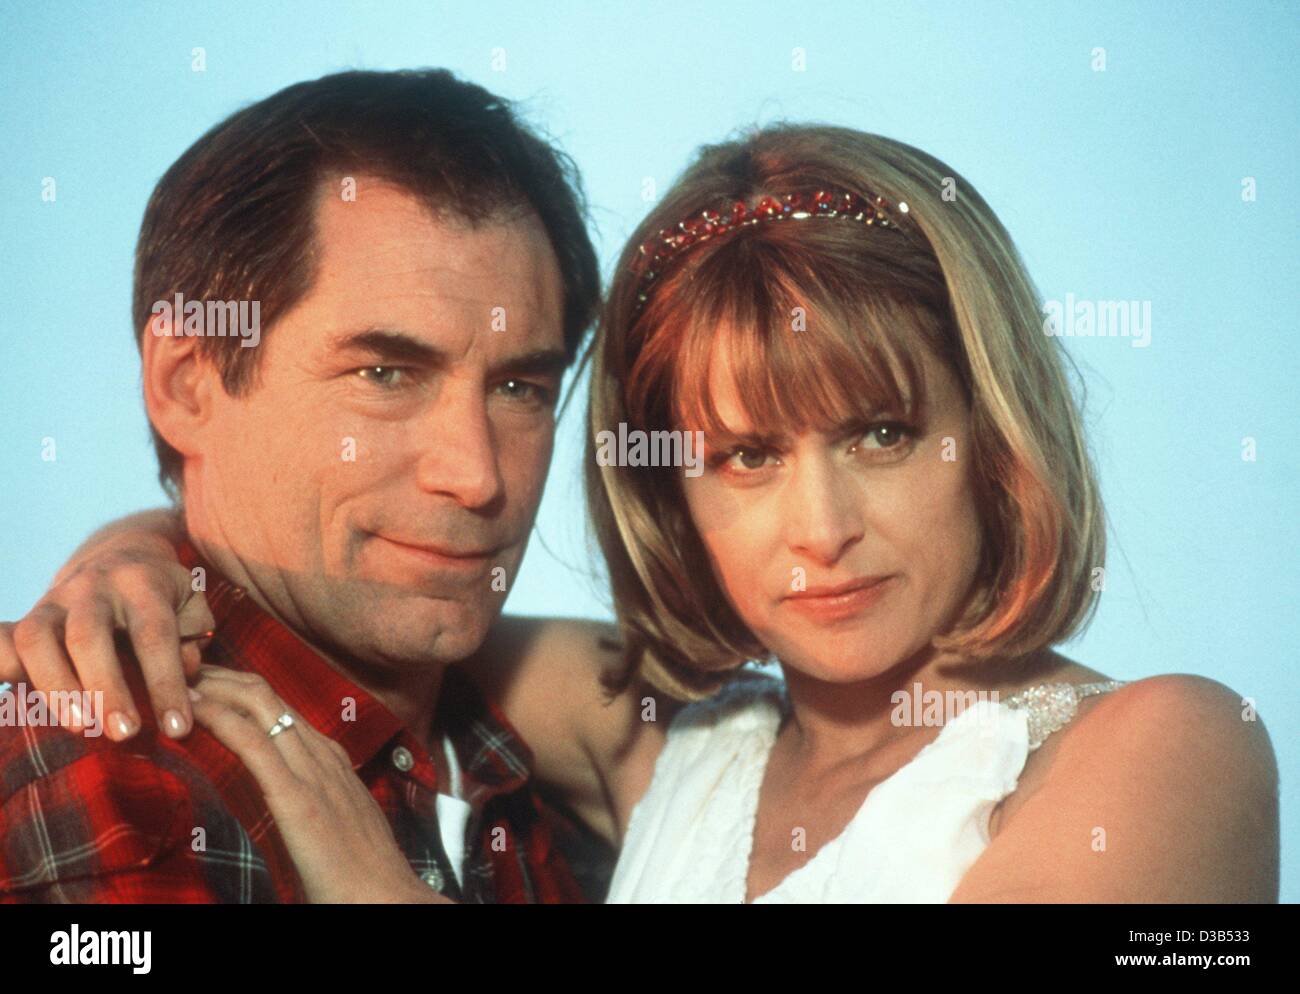 (dpa files) - Nastassja Kinski stars with Timothy Dalton in the movie 'Time Share', 1999. Kinski is the daughter of German actor Klaus Kinski. She was born on 24 January 1959 (other sources: 1961) in Berlin, West Germany, and had her break through in the 1977 crime series episode 'Tatort - Reifezeug Stock Photo